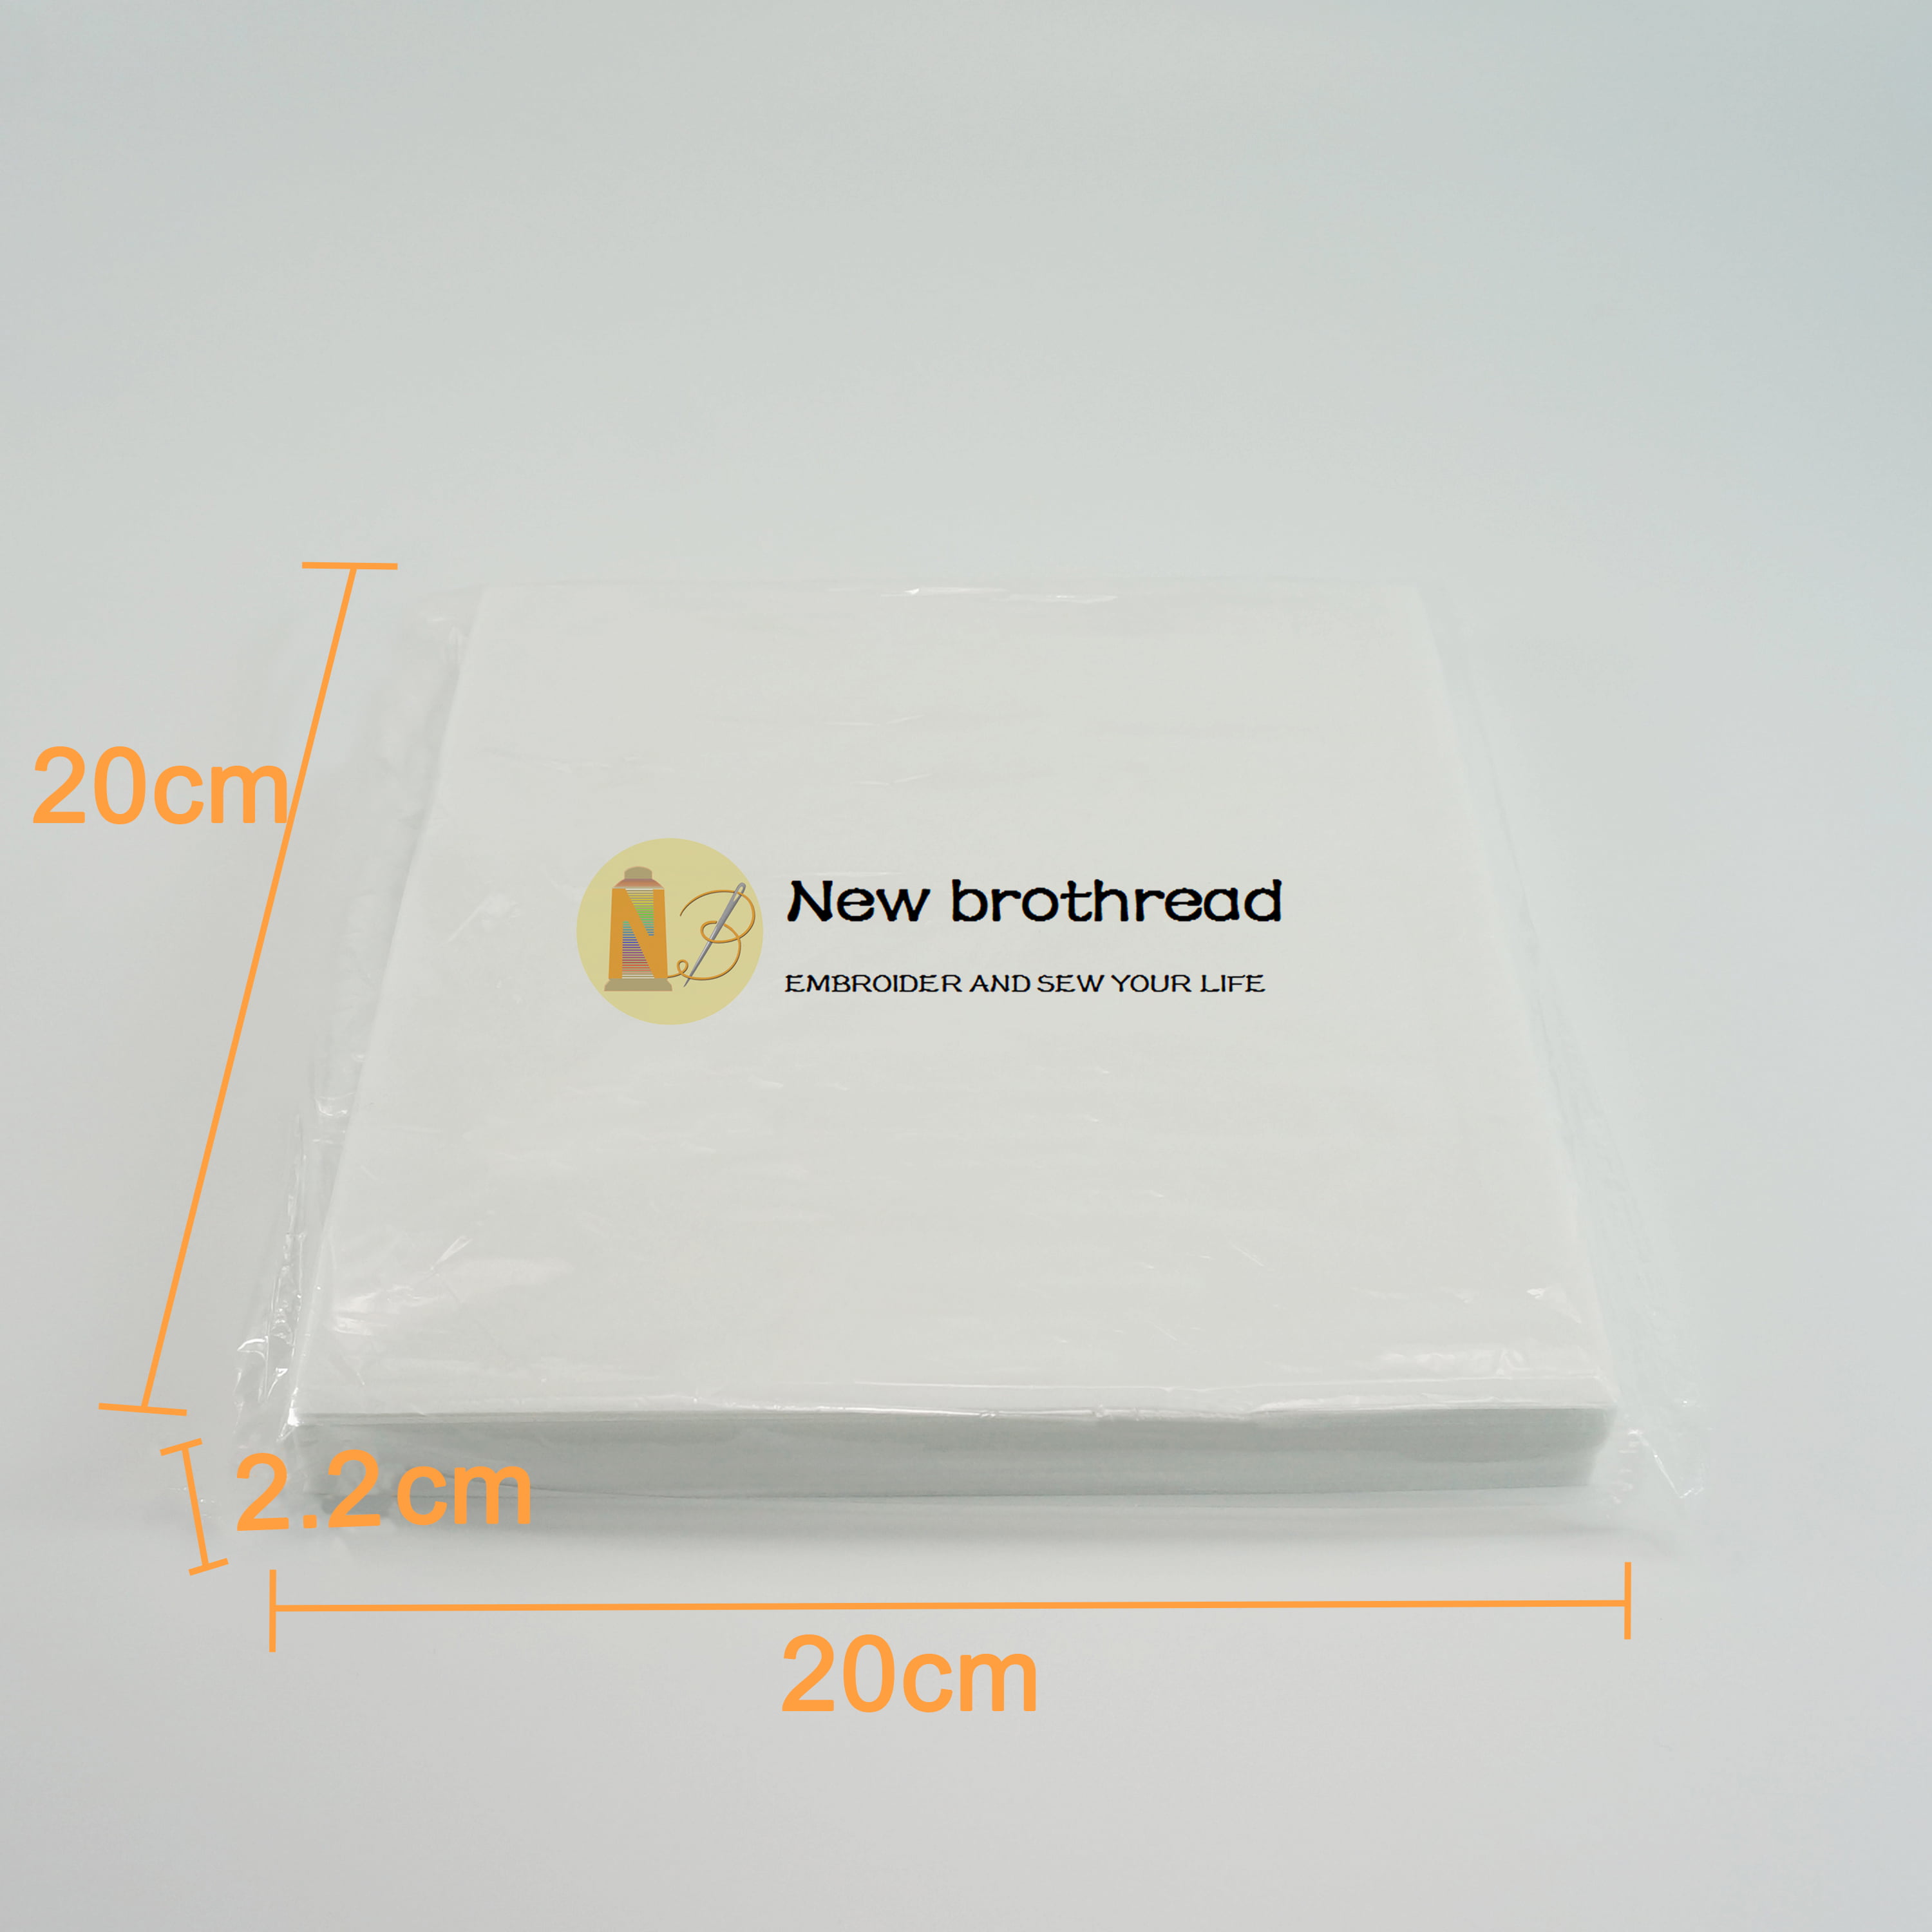 Embroidery Stabilizer Starter Kit (7” x 8” Sheets)